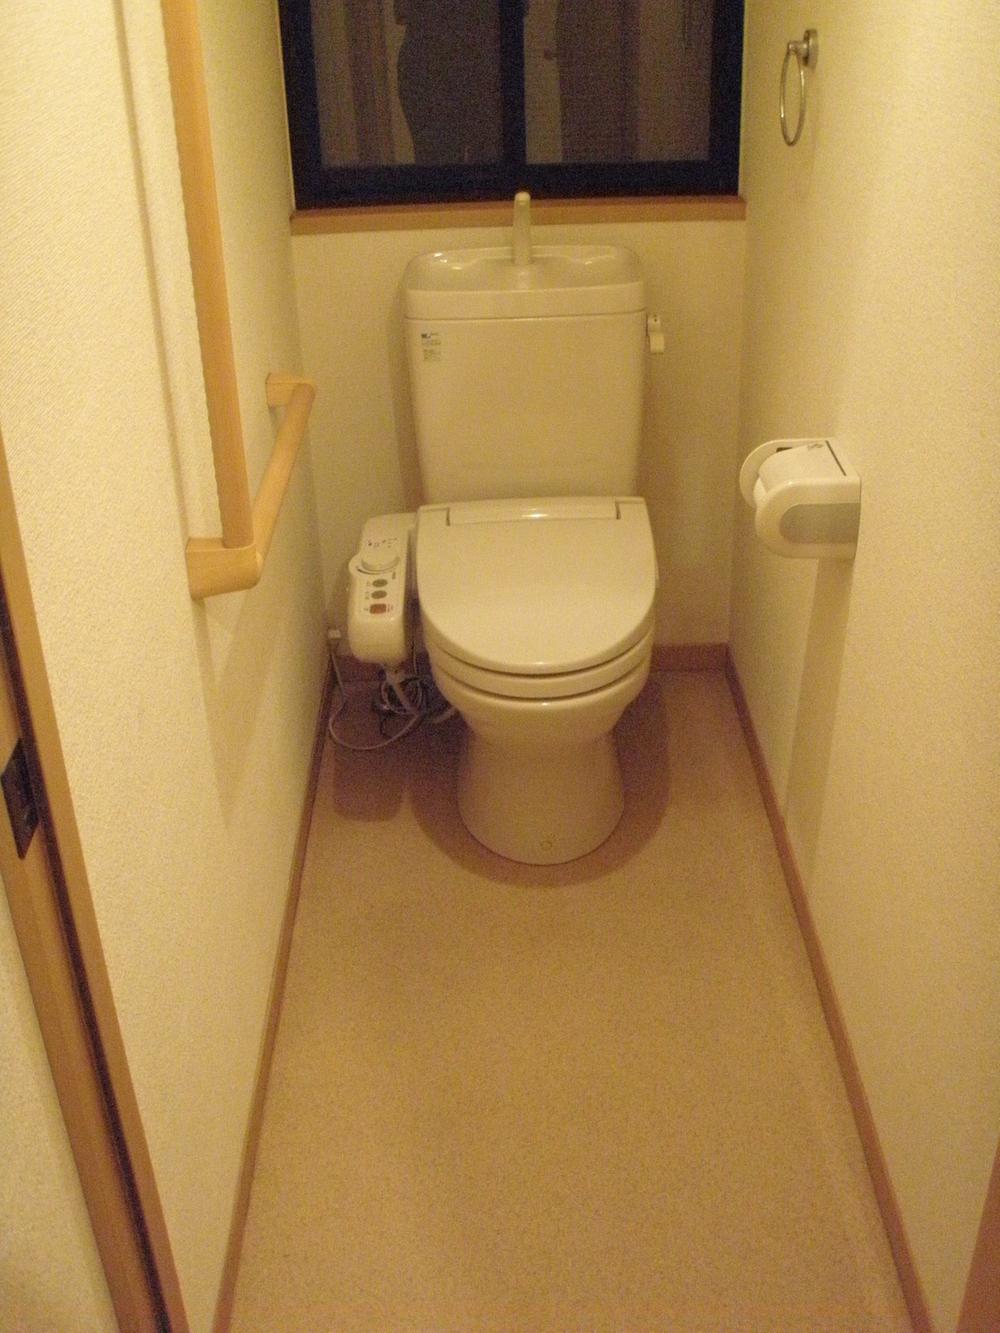 Toilet. Toilet is located in each of the first and second floors